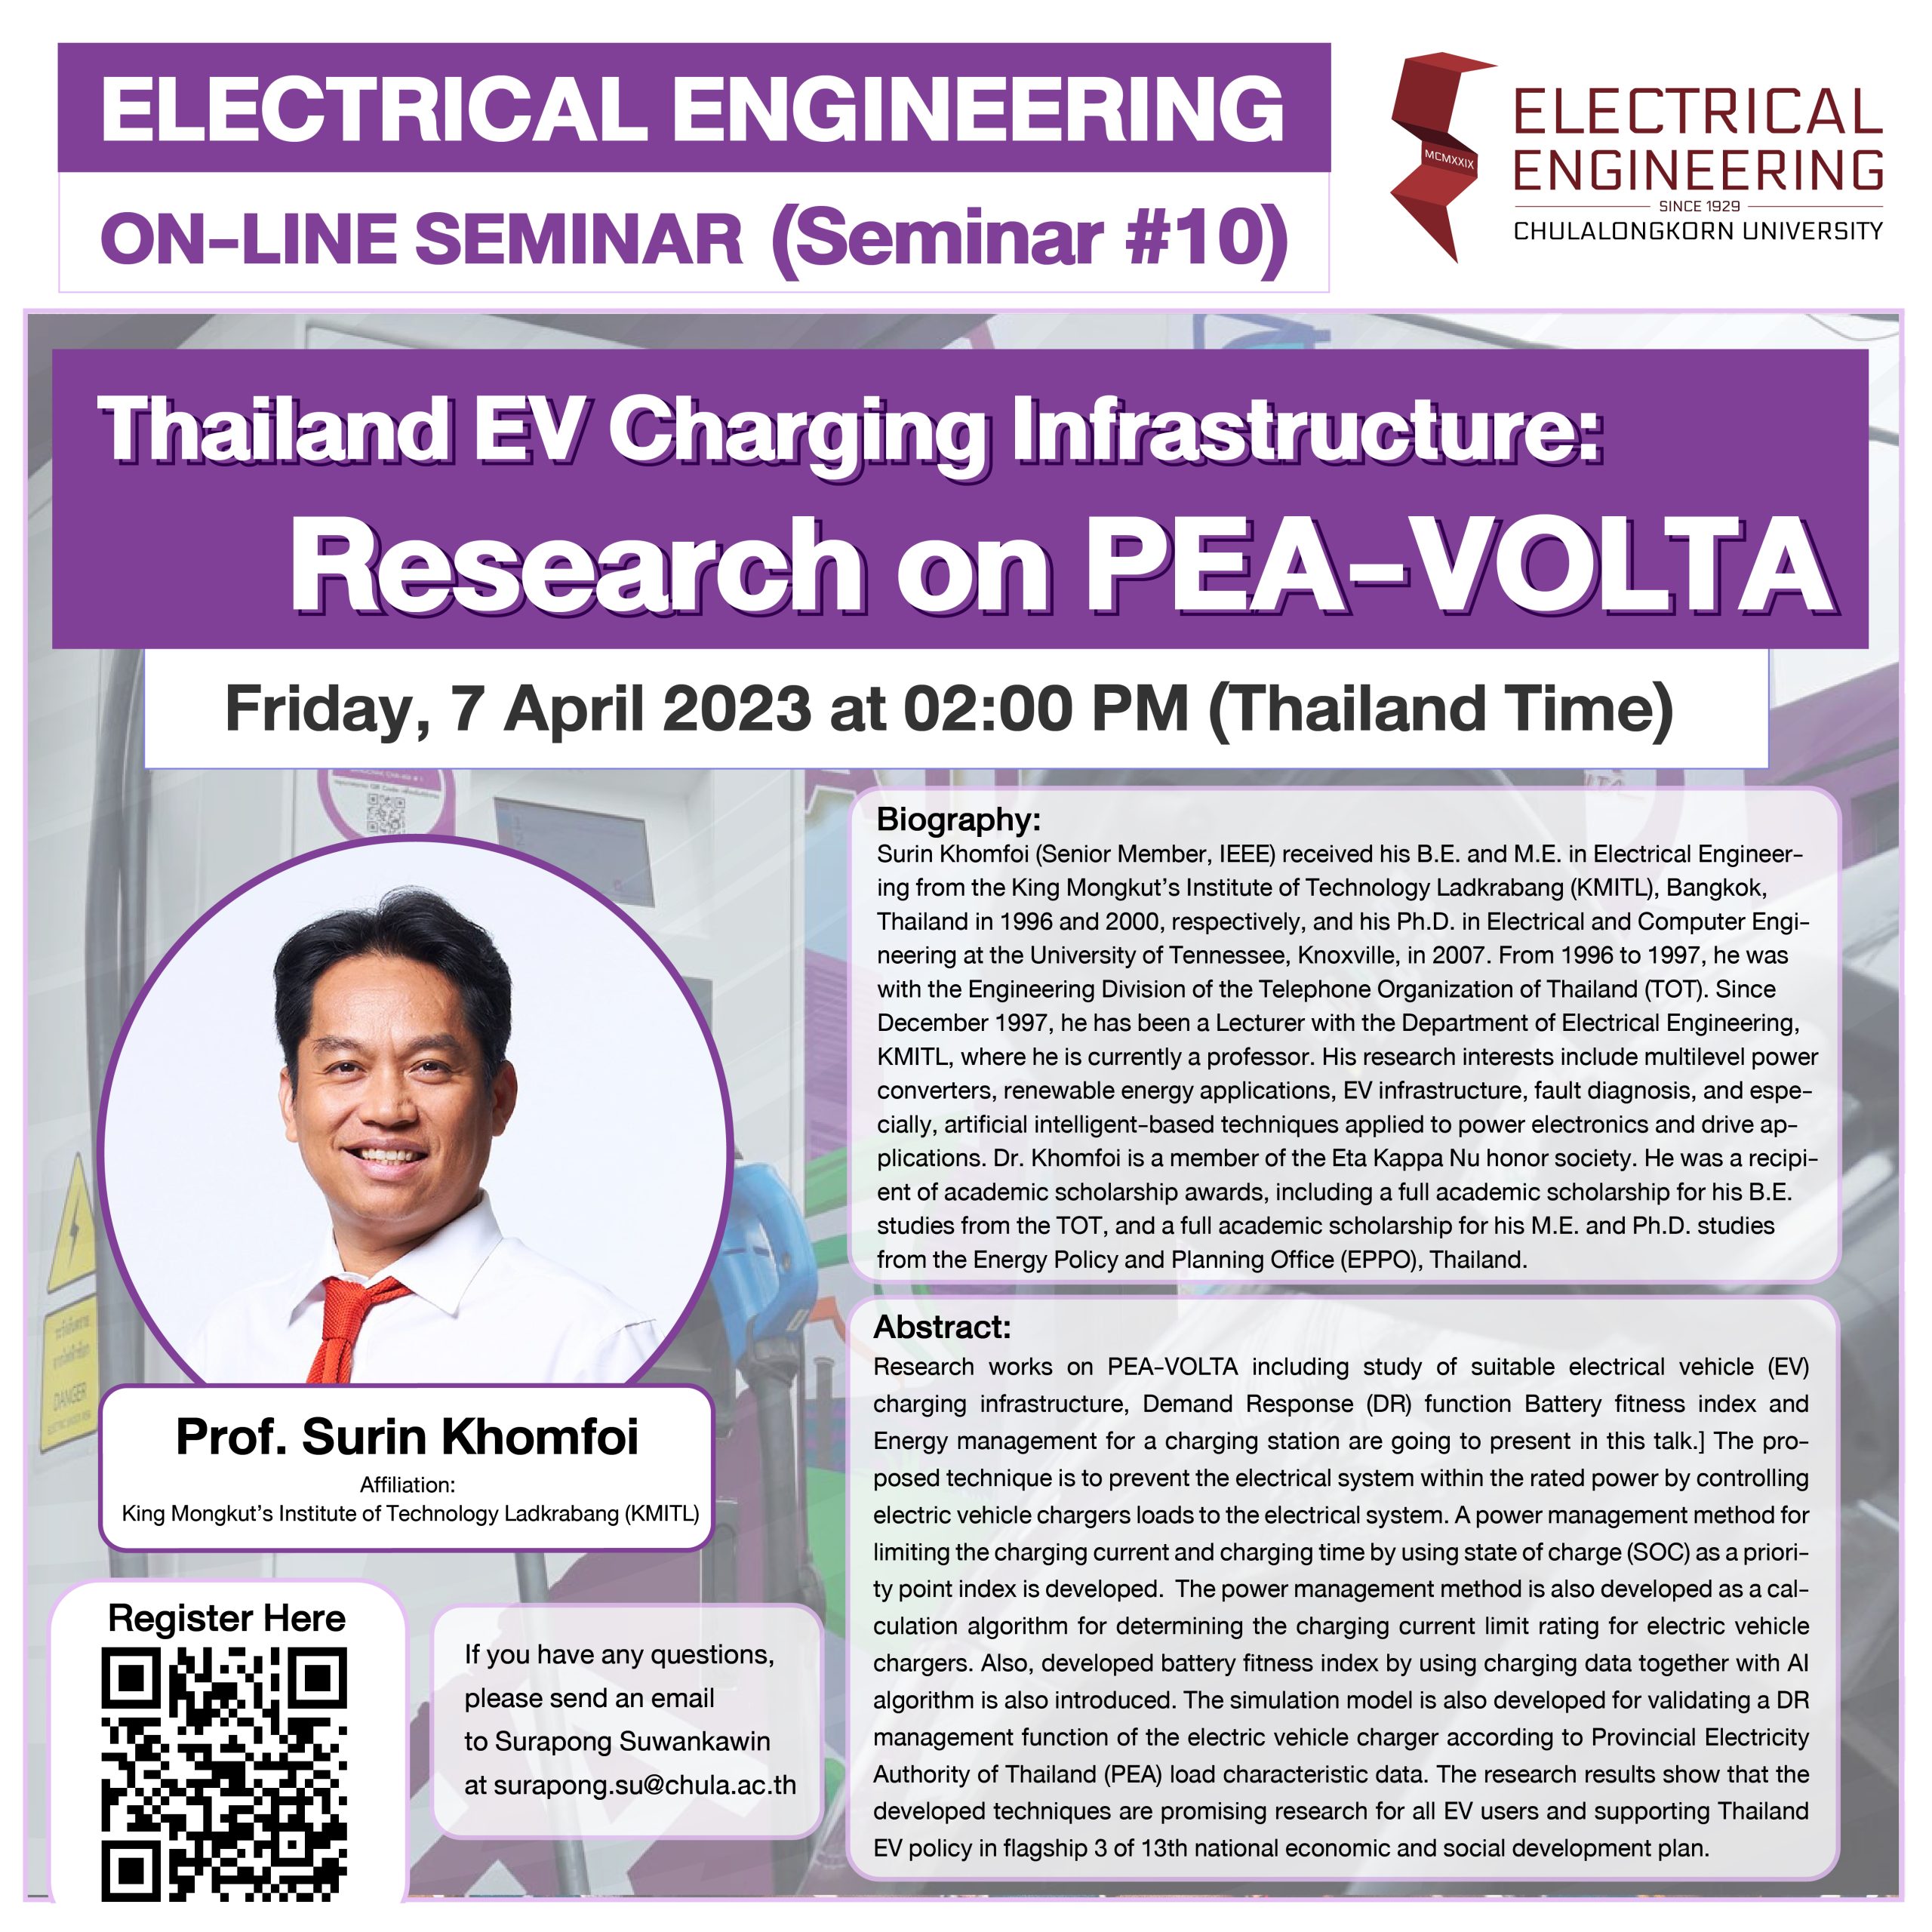 ELECTRICAL ENGINEERING ON-LINE SEMINAR (Seminar #10) "Thailand EV Charging Infrastructure: Research on PEA-VOLTA"